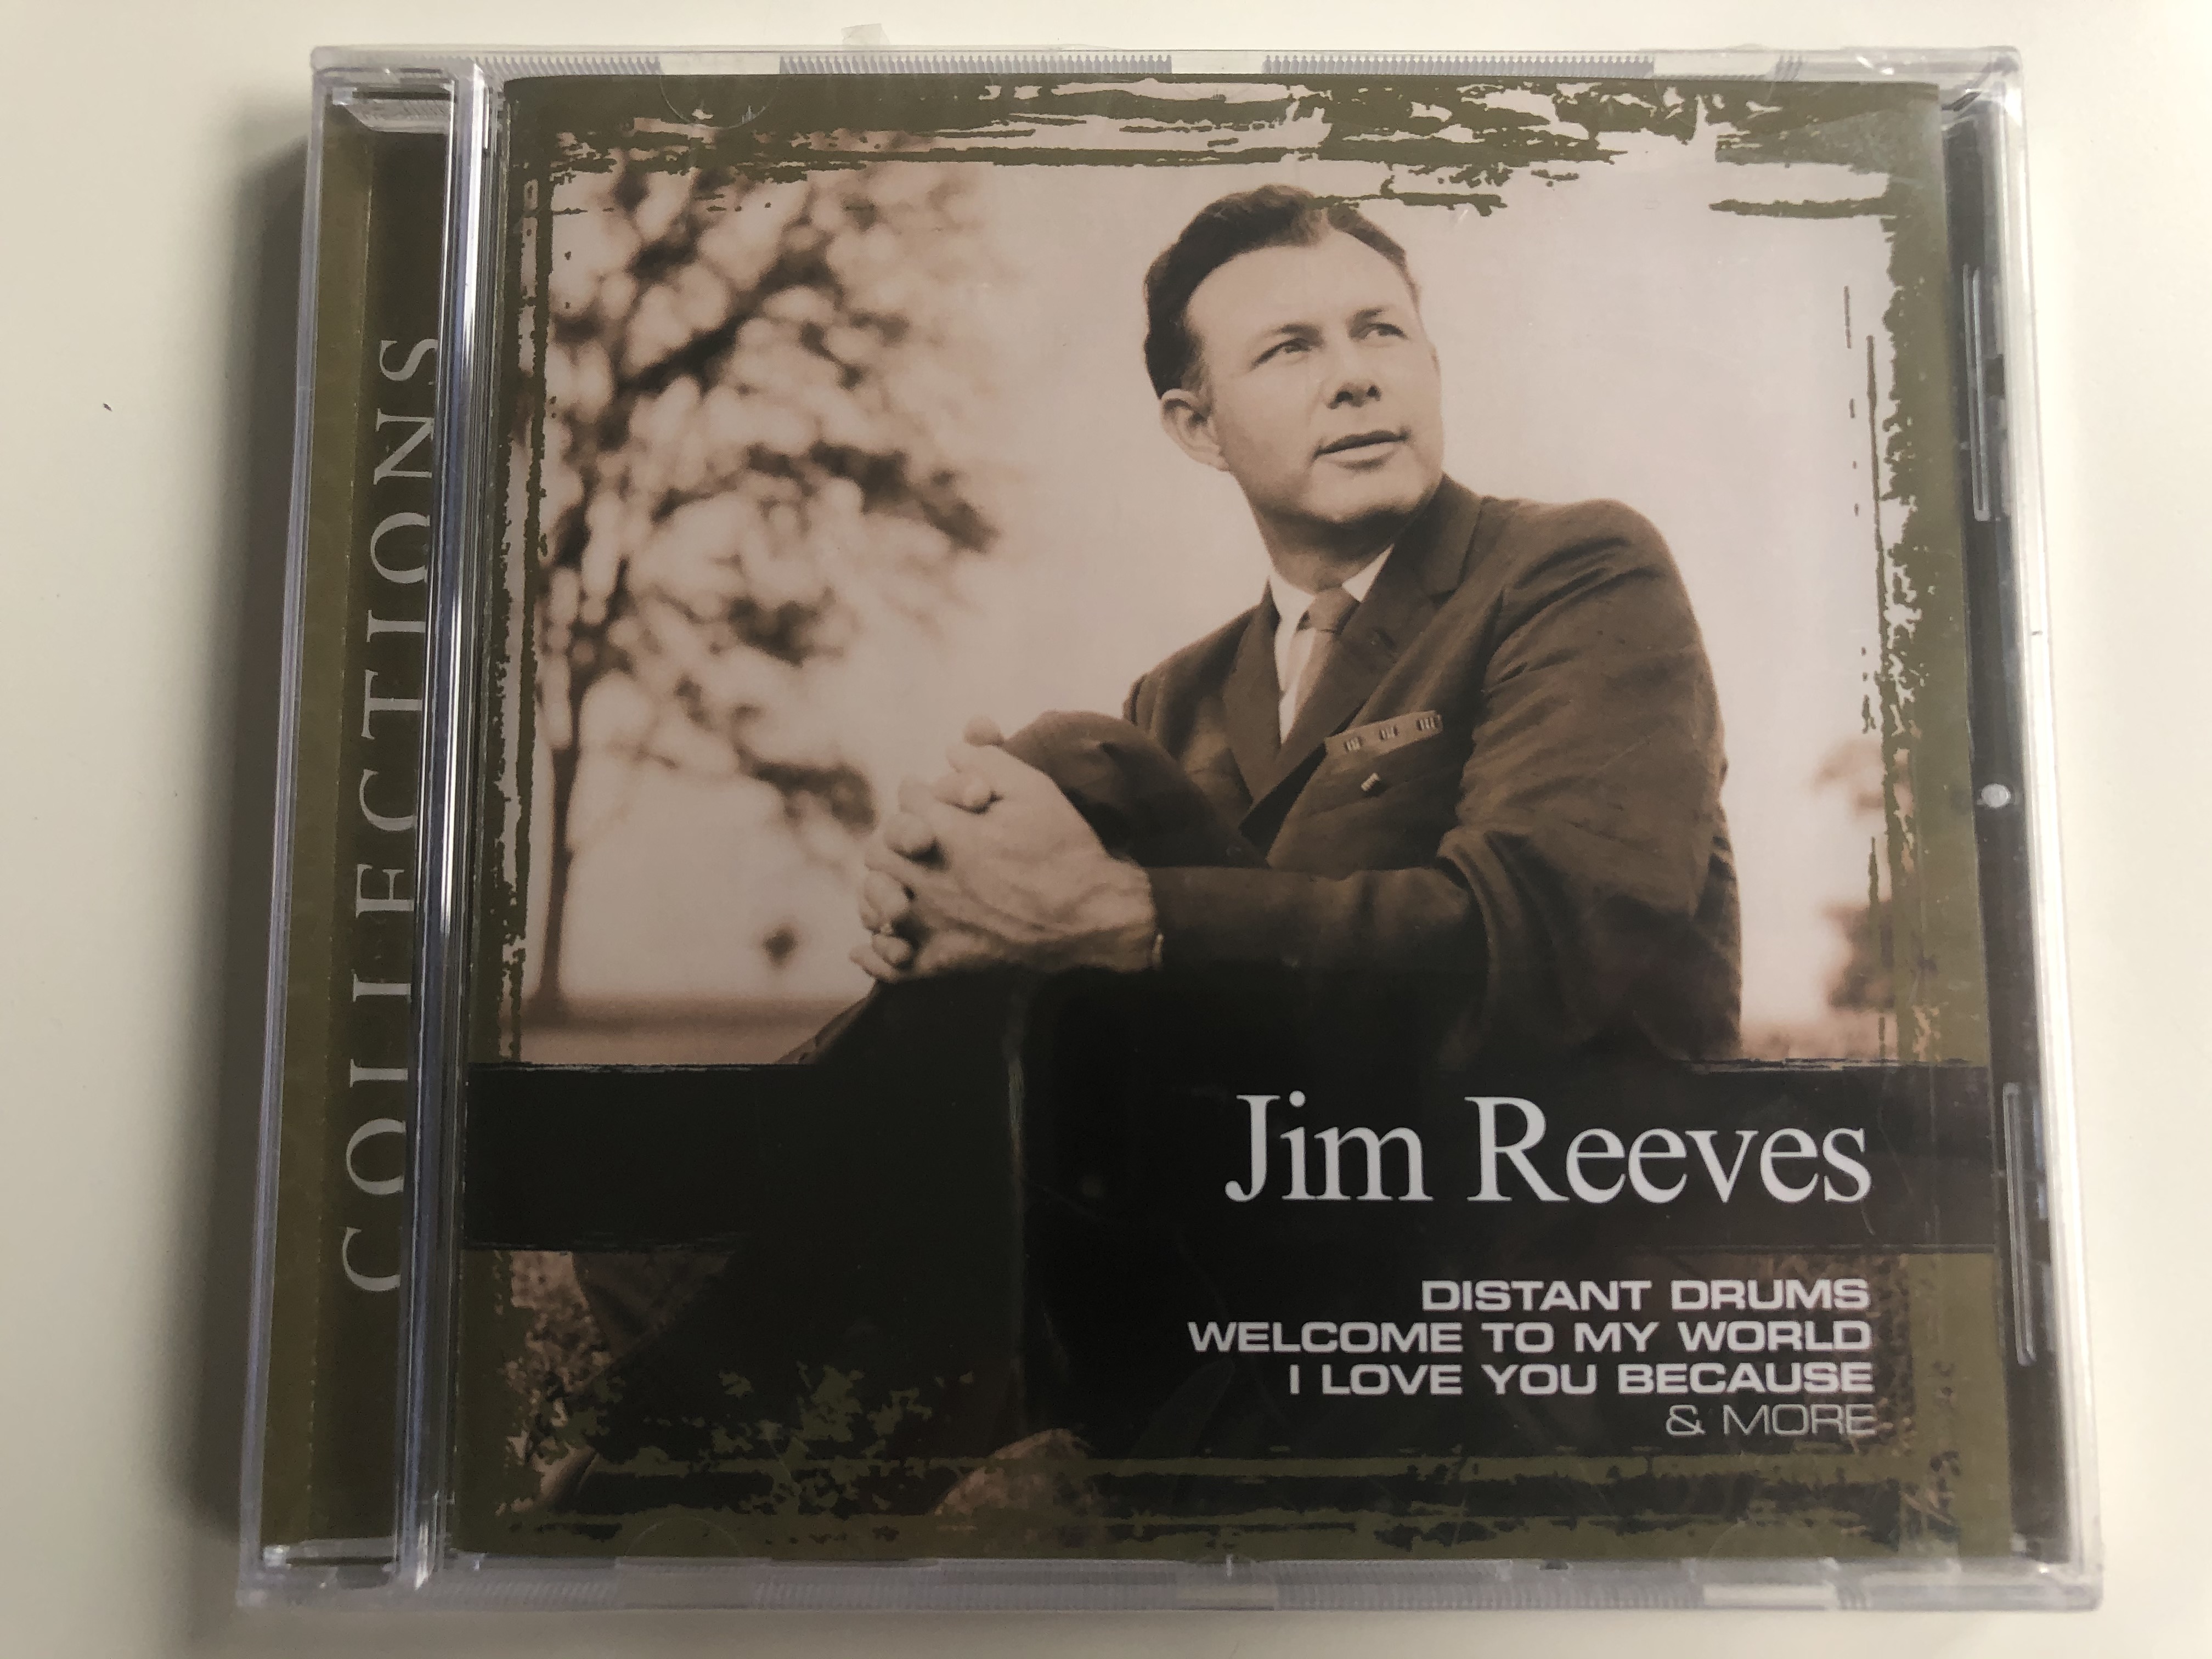 jim-reeves-collections-distant-drums-welcome-to-my-world-i-love-you-because-more-sony-bmg-music-entertainment-audio-cd-2008-88697266162-1-.jpg